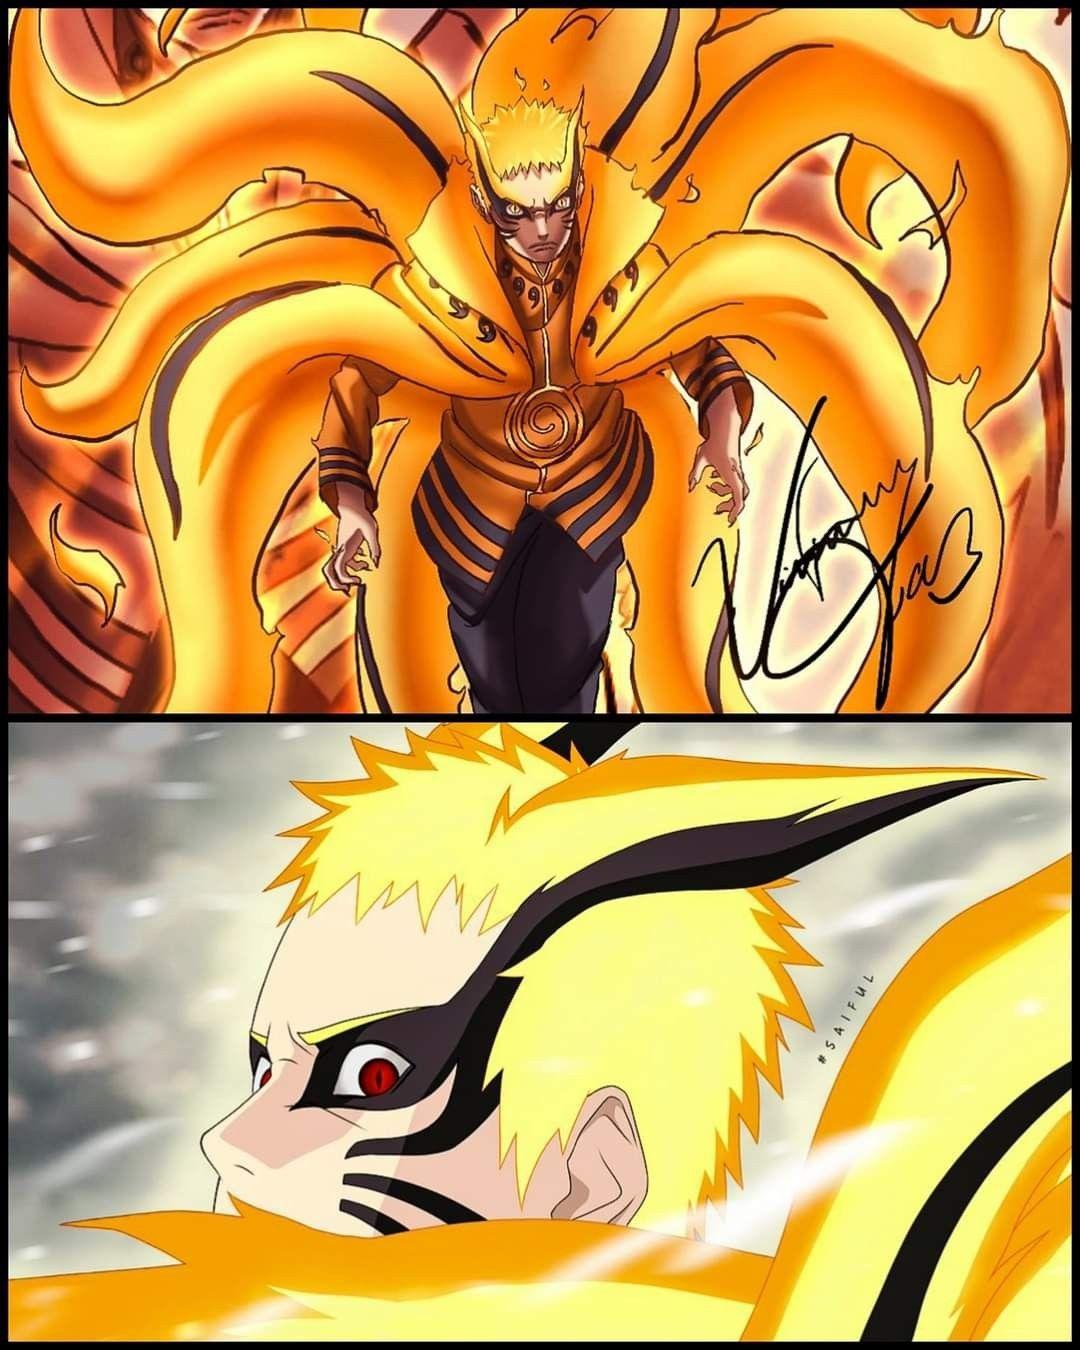 Naruto's Final Form Revealed - YouTube